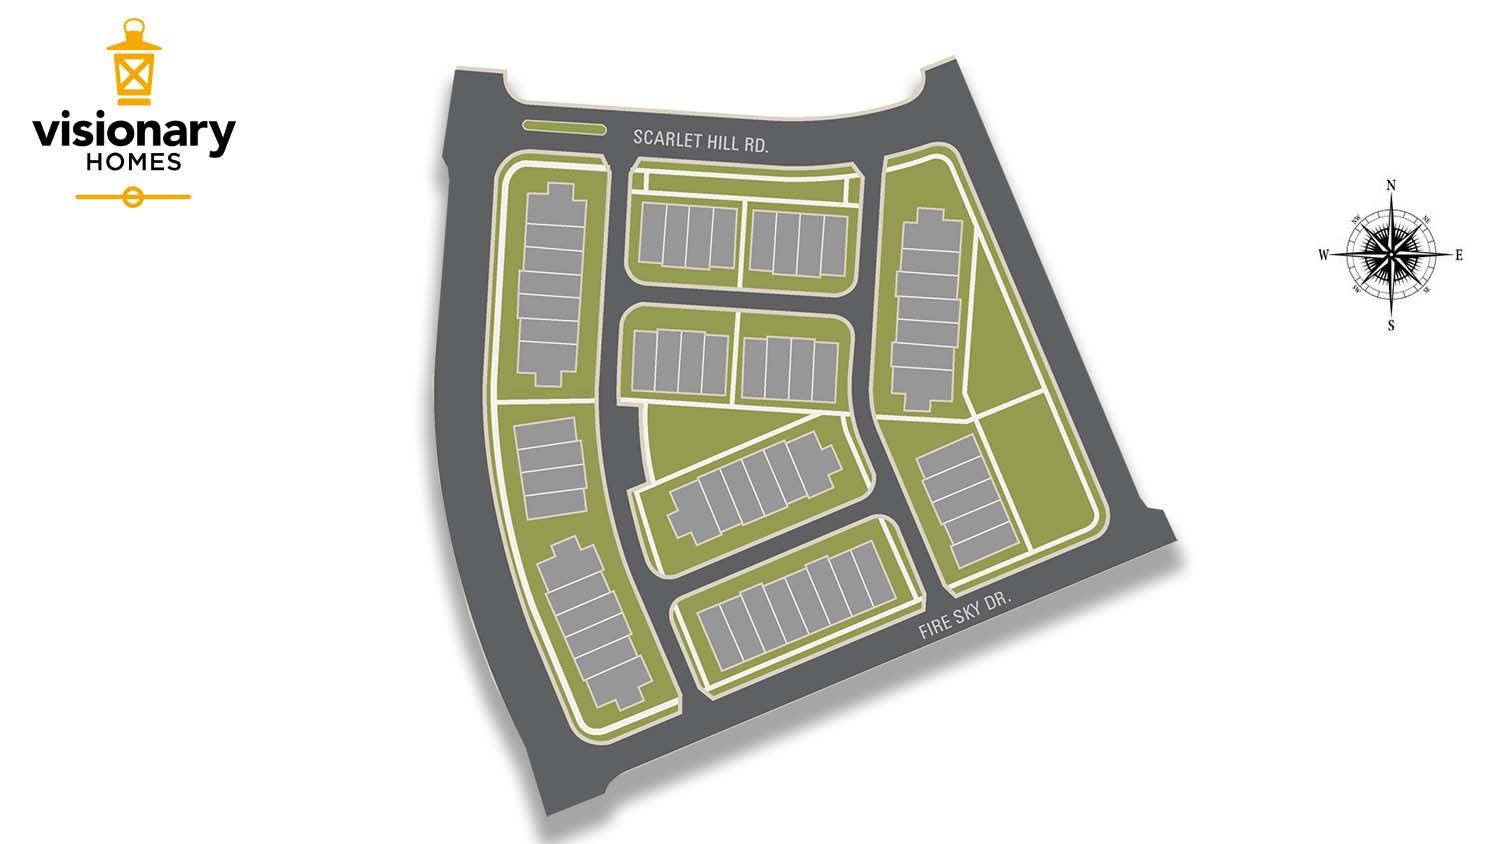 St. George, UT Desert Color Townhomes New Homes from Visionary Homes